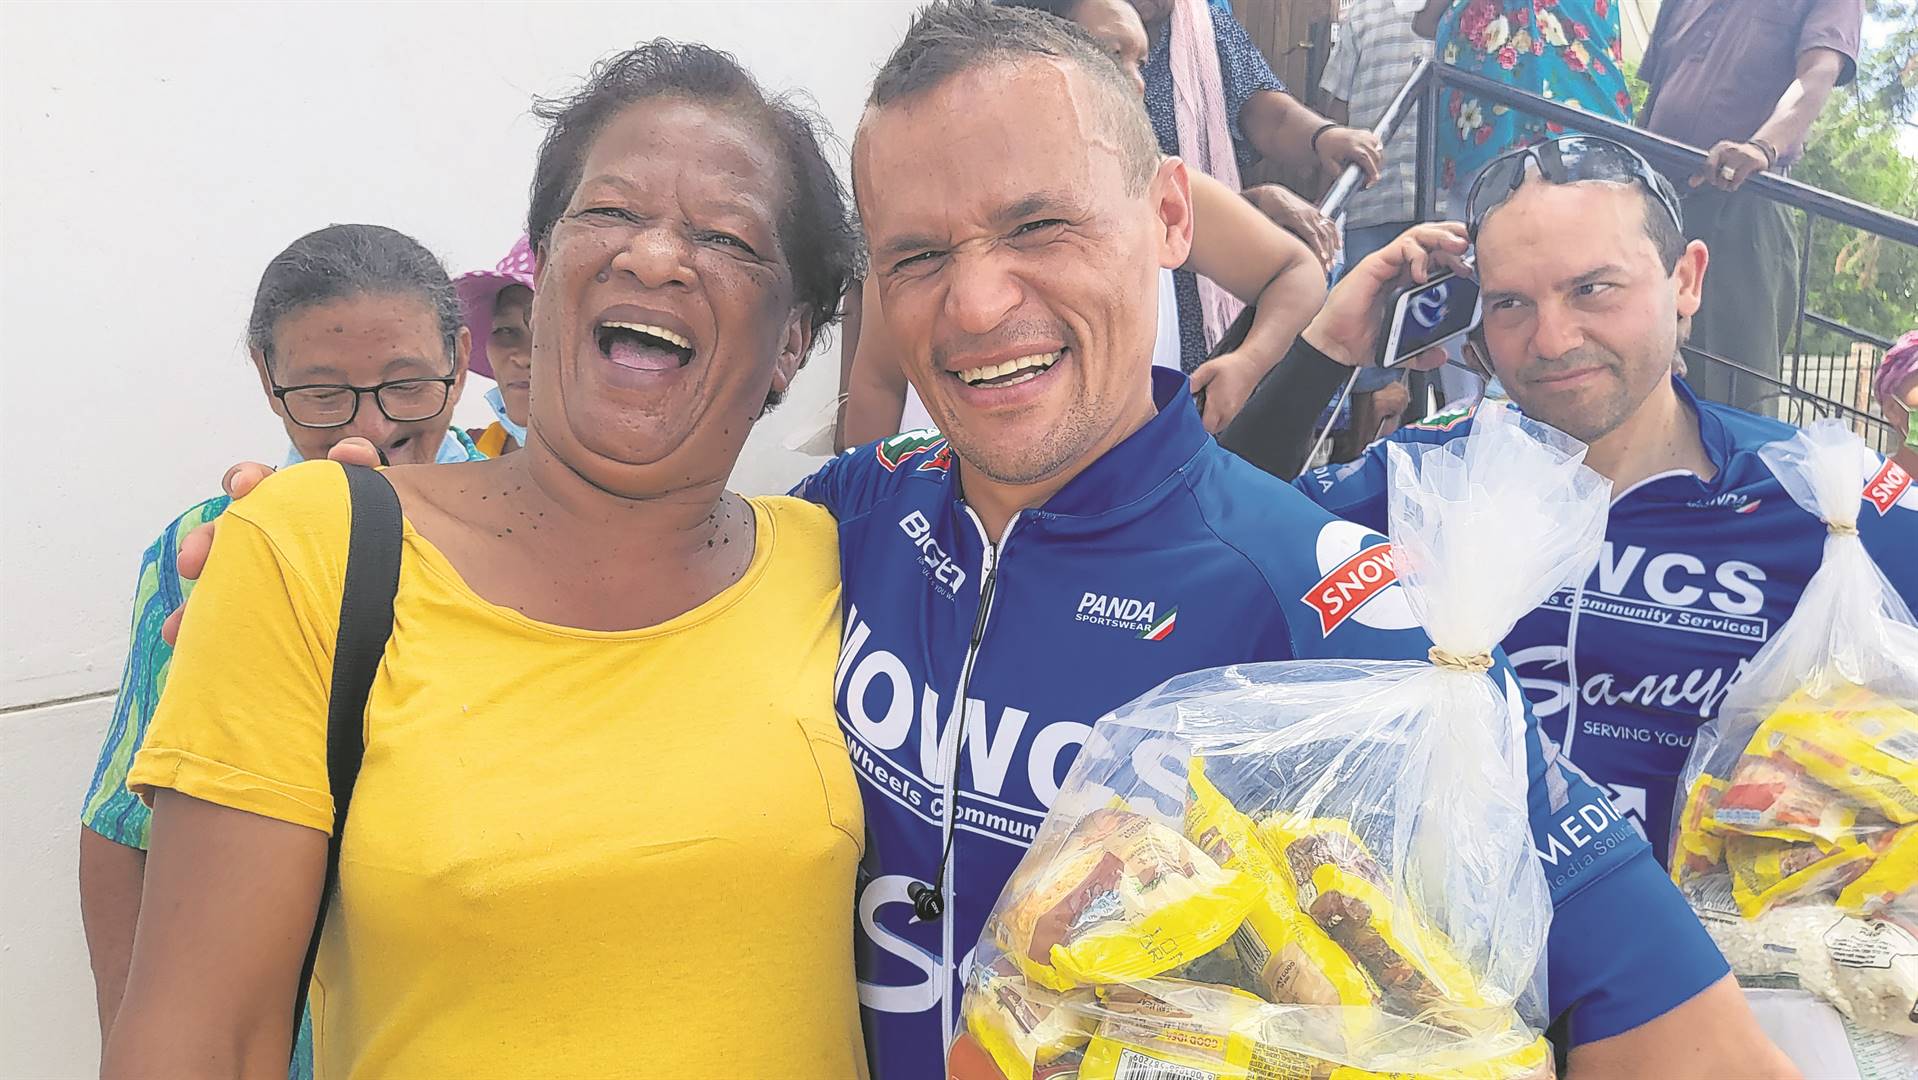 Along the way from Kimberley to Cape Town, cyclers of Meals on Wheels’ annual Extreme Ride 4 Hunger Cycle Tour will distribute care packages to the elderly.Photo: Supplied